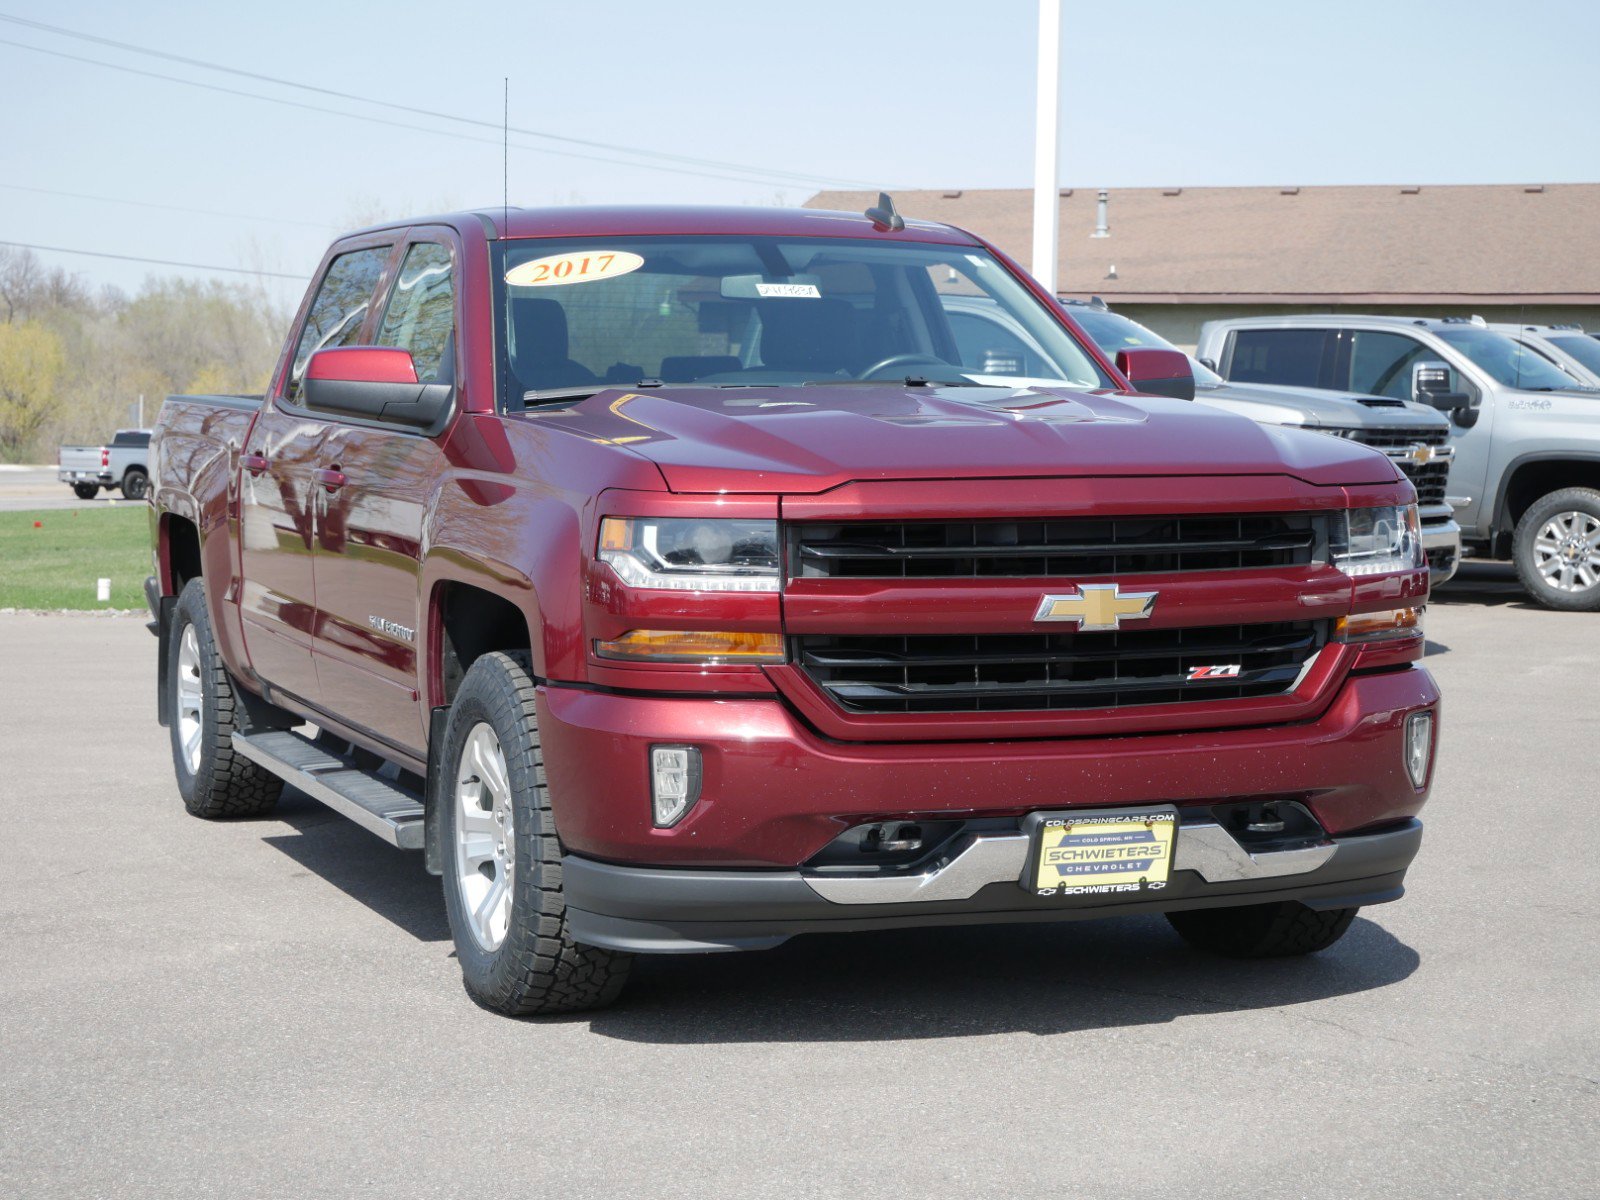 Used 2017 Chevrolet Silverado 1500 LT with VIN 3GCUKREC2HG339322 for sale in Cold Spring, Minnesota